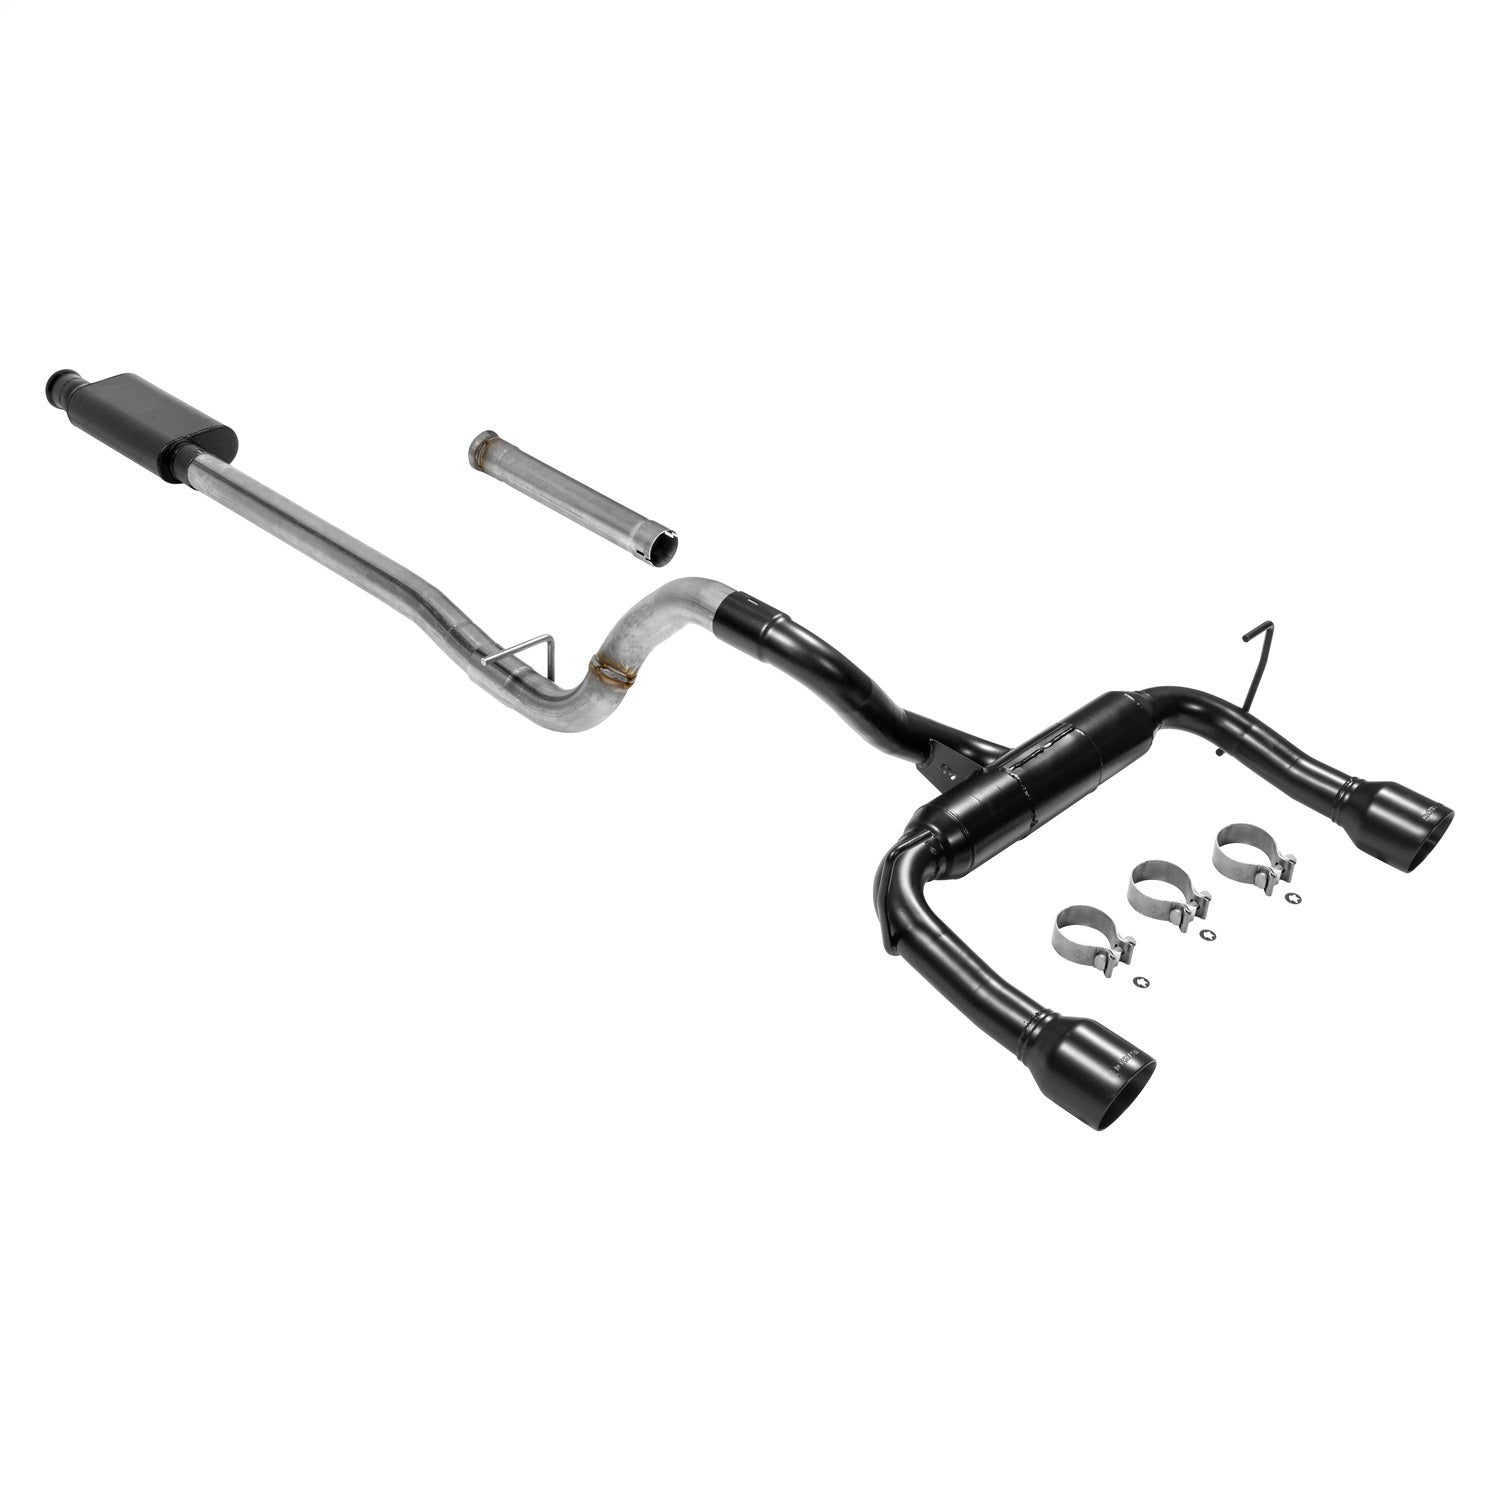 Flowmaster 817844 Outlaw Series Cat Back Exhaust System Fits Wrangler (JL)